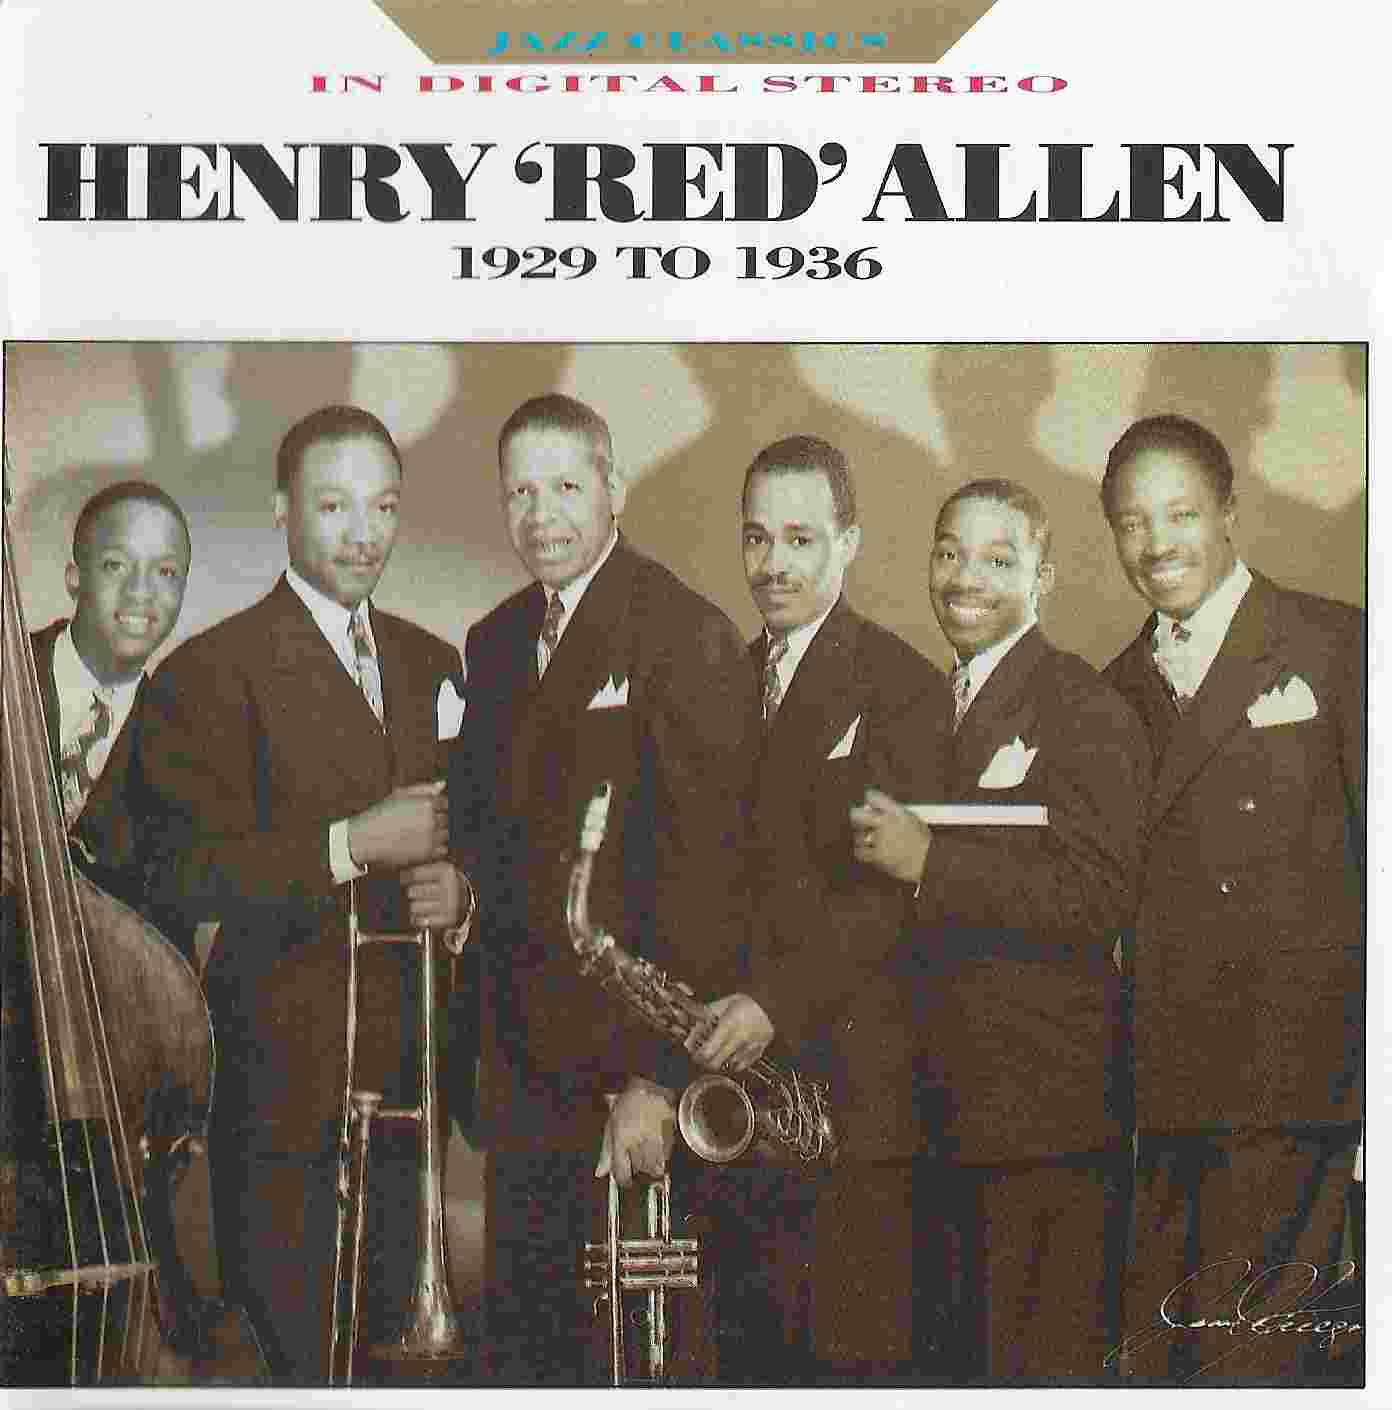 Picture of Jazz classics - Henry 'Red' Allen by artist Henry 'Red' Allen from the BBC cds - Records and Tapes library